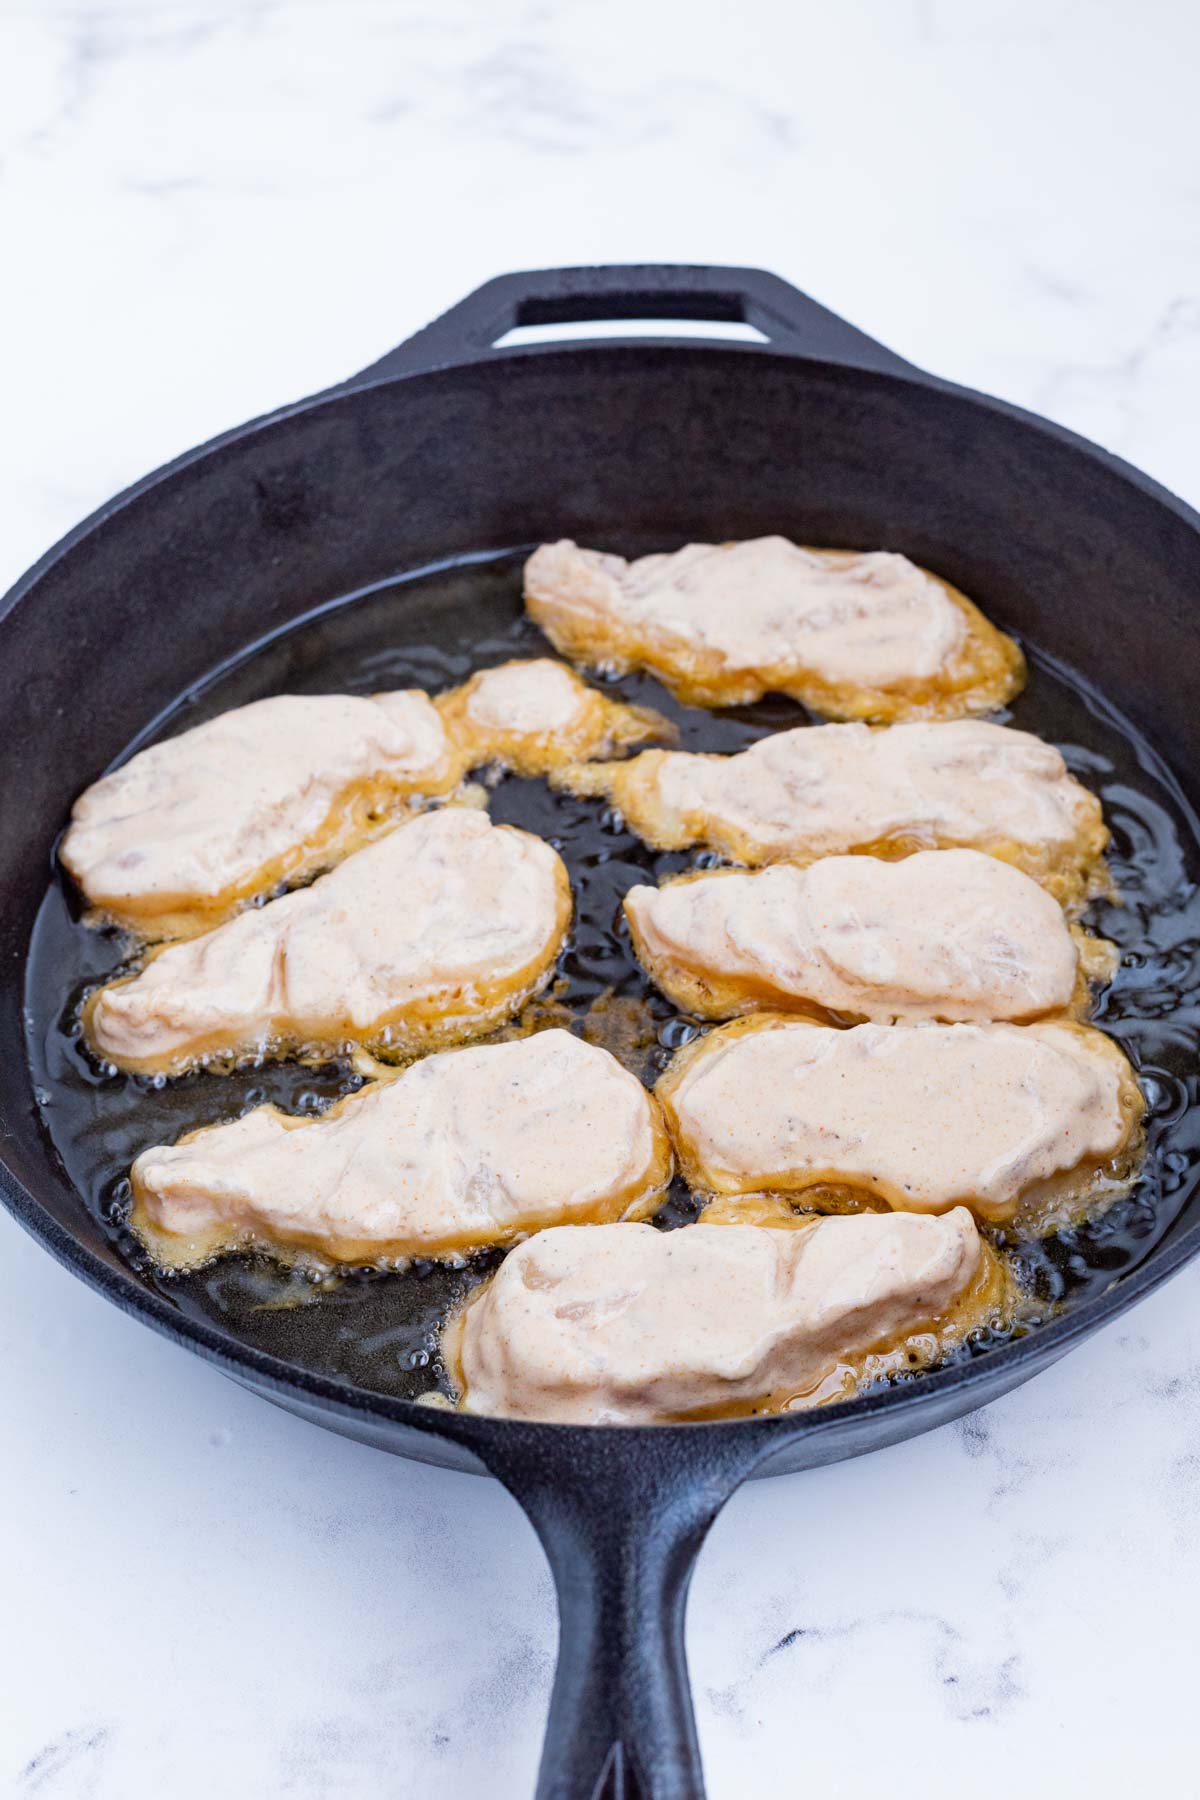 Beer battered fish is cooked in a skillet.